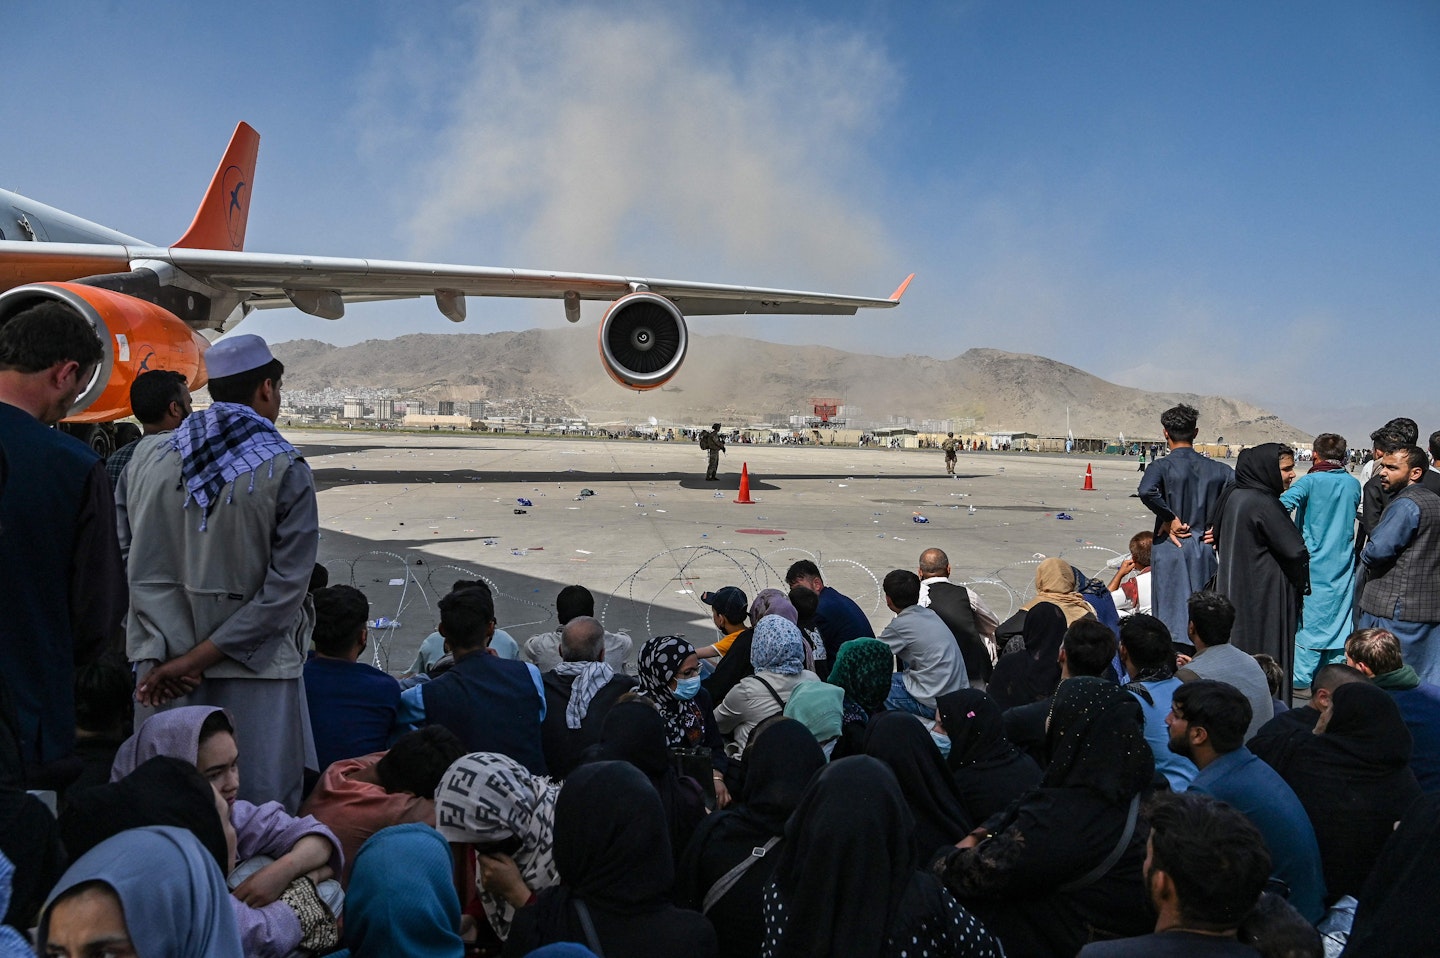 People attempt to flee Afghanistan at Kabul airport